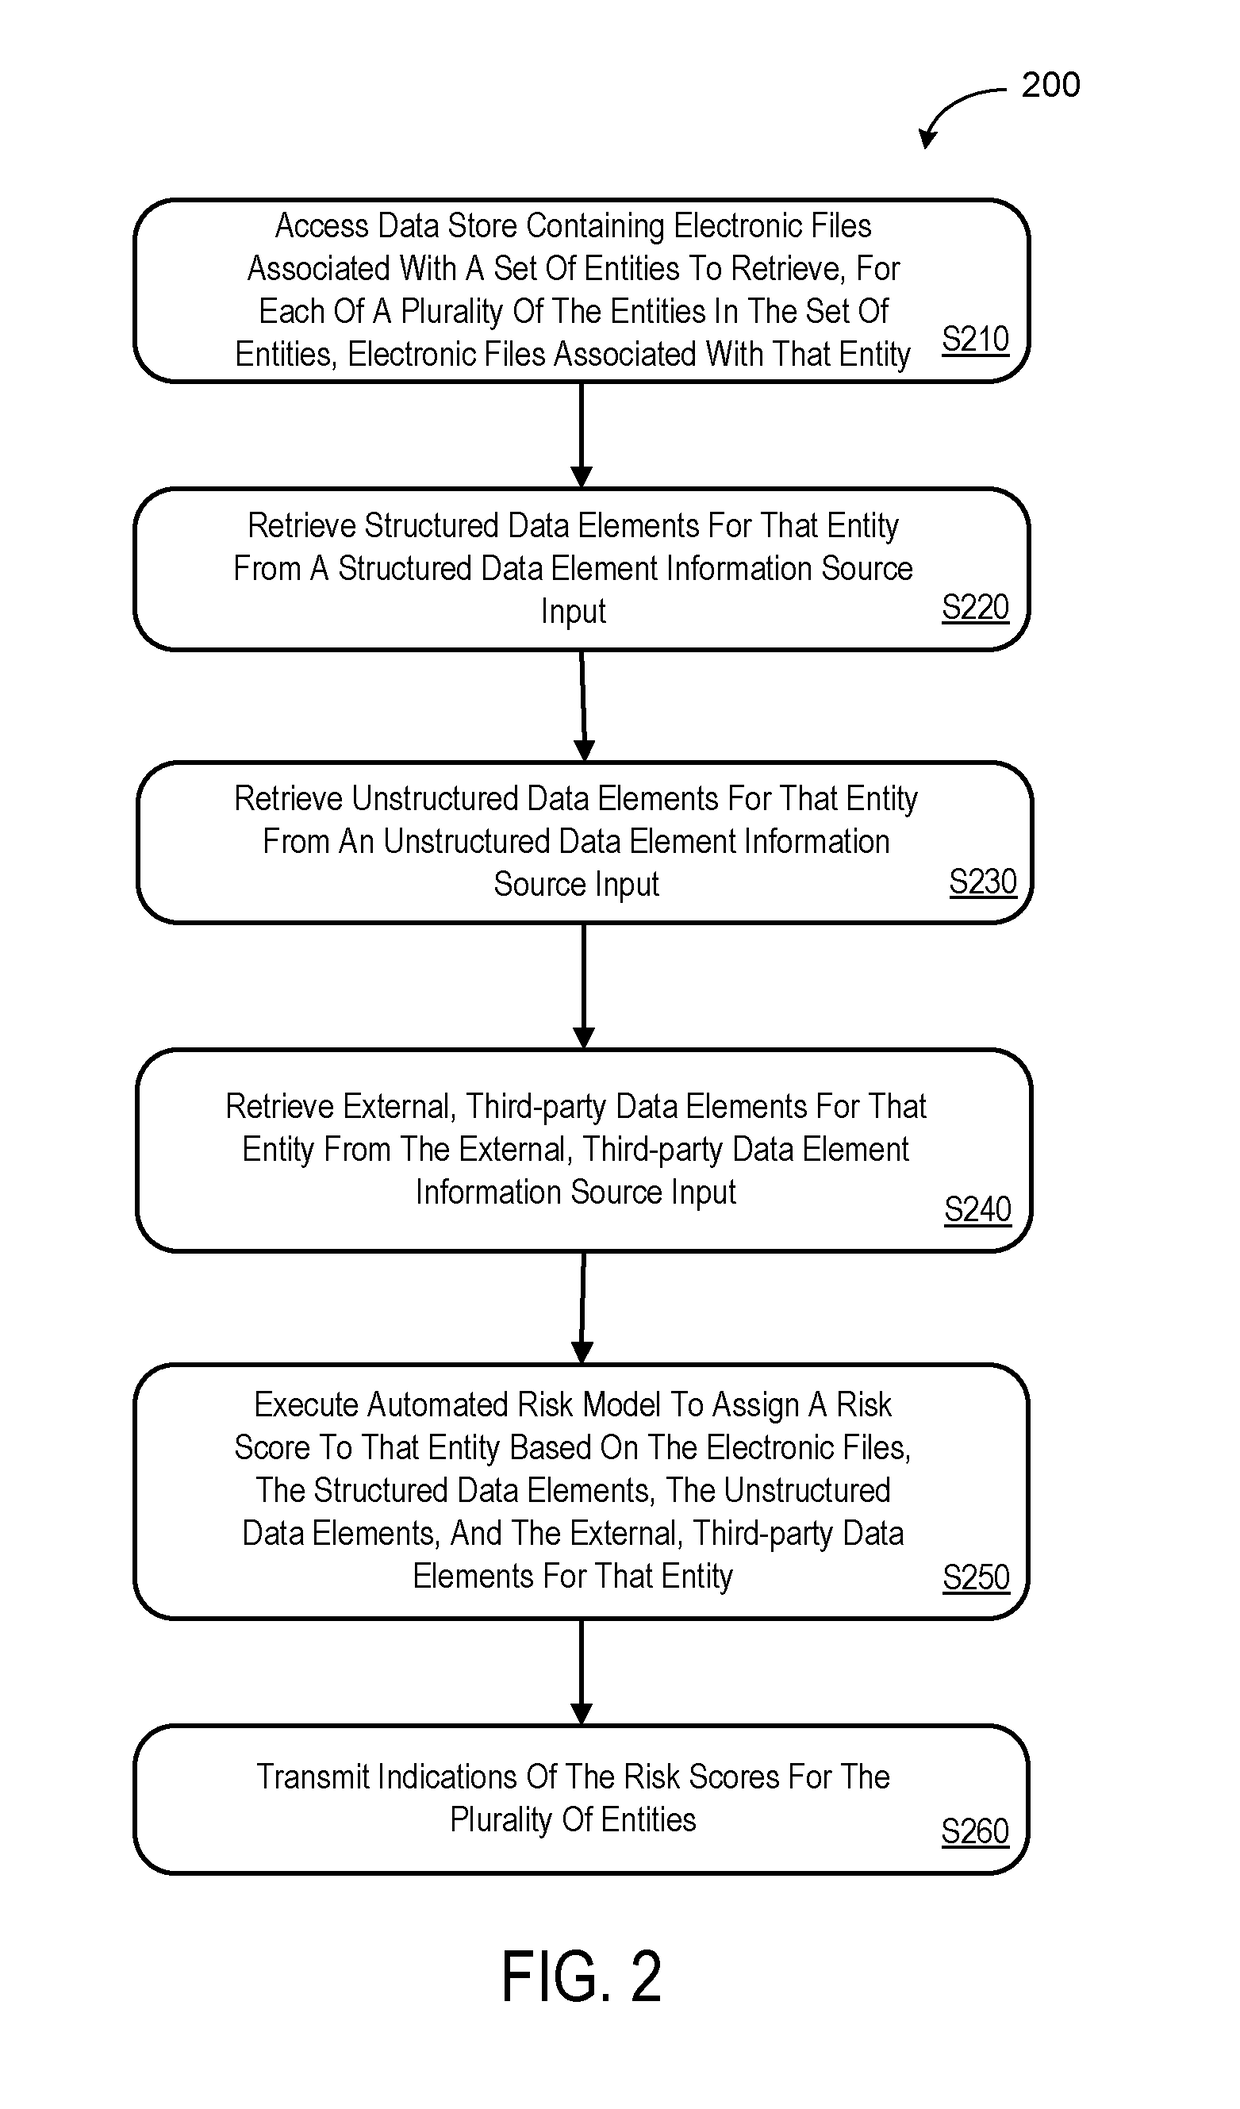 Processing system for data elements received via source inputs